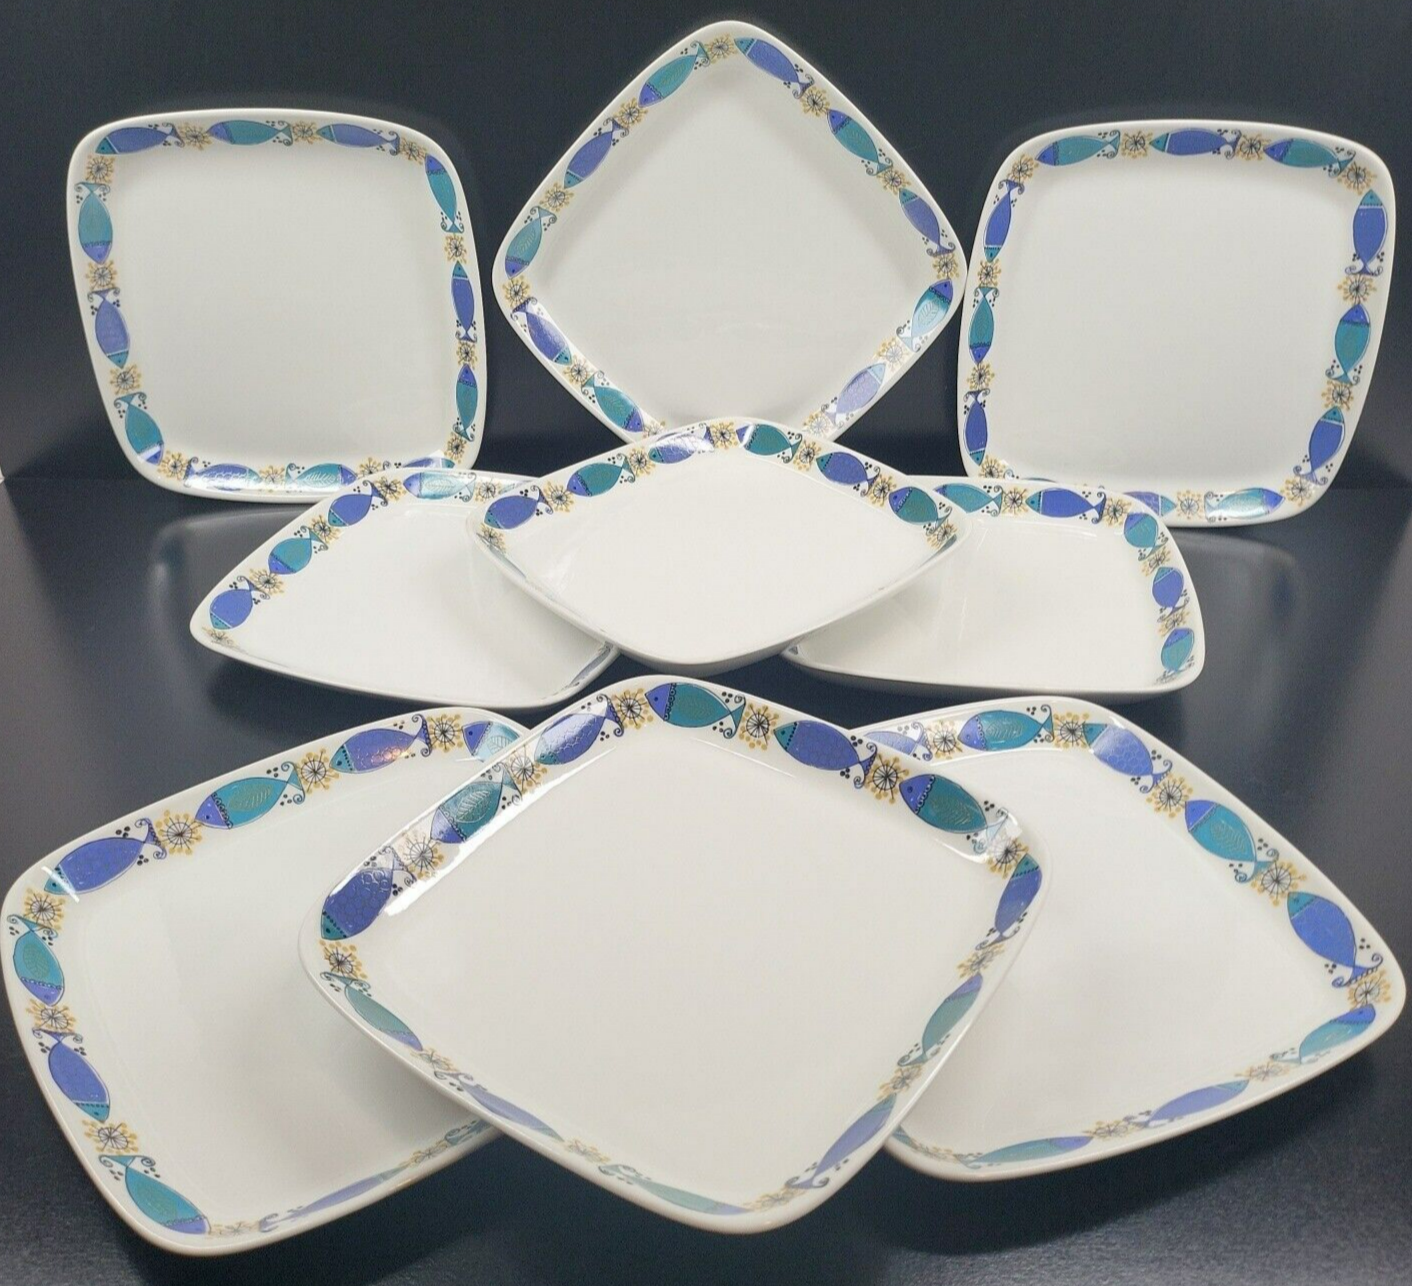 Primary image for 9 Figgjo Clupea Norway Luncheon Plates Set Vintage Turi Fish Blue Green Dish Lot